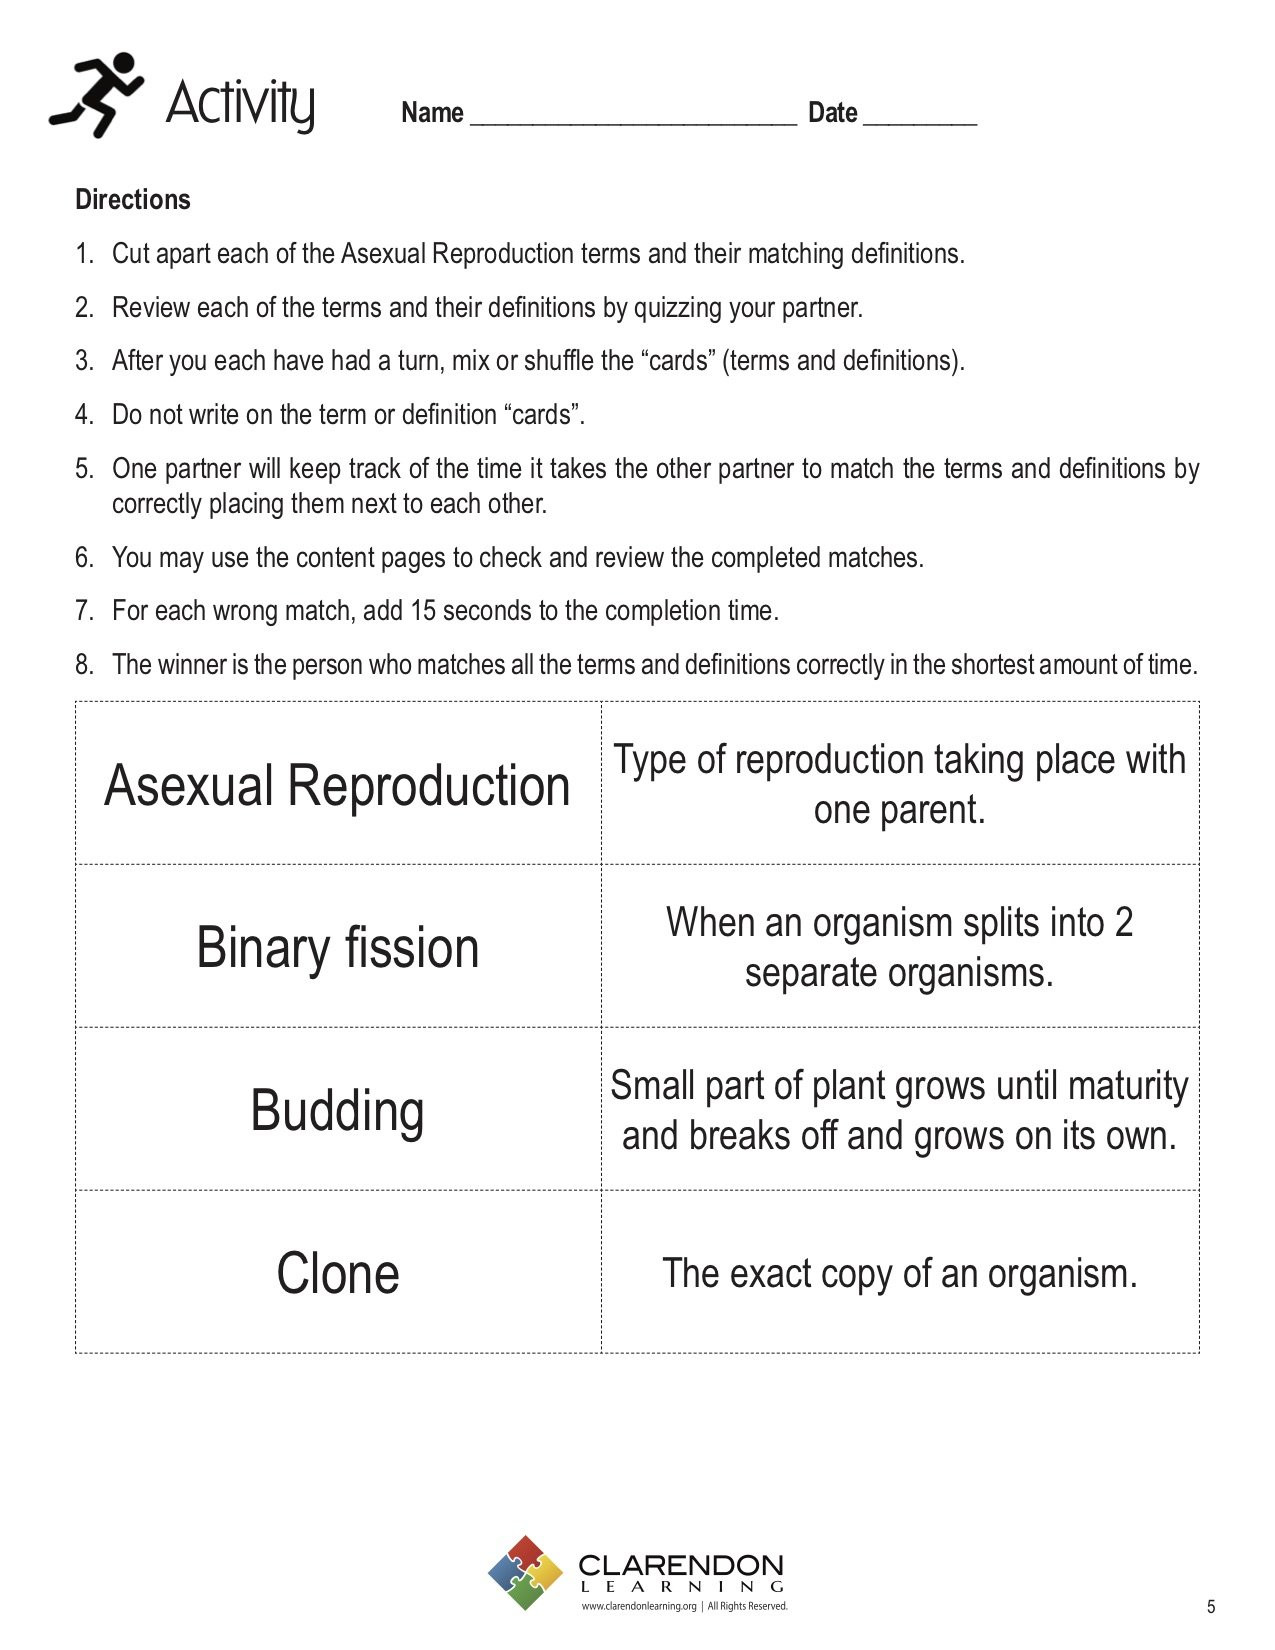 Meiosis Matching Worksheet Answer Key A Ual Reproduction Lesson Plan